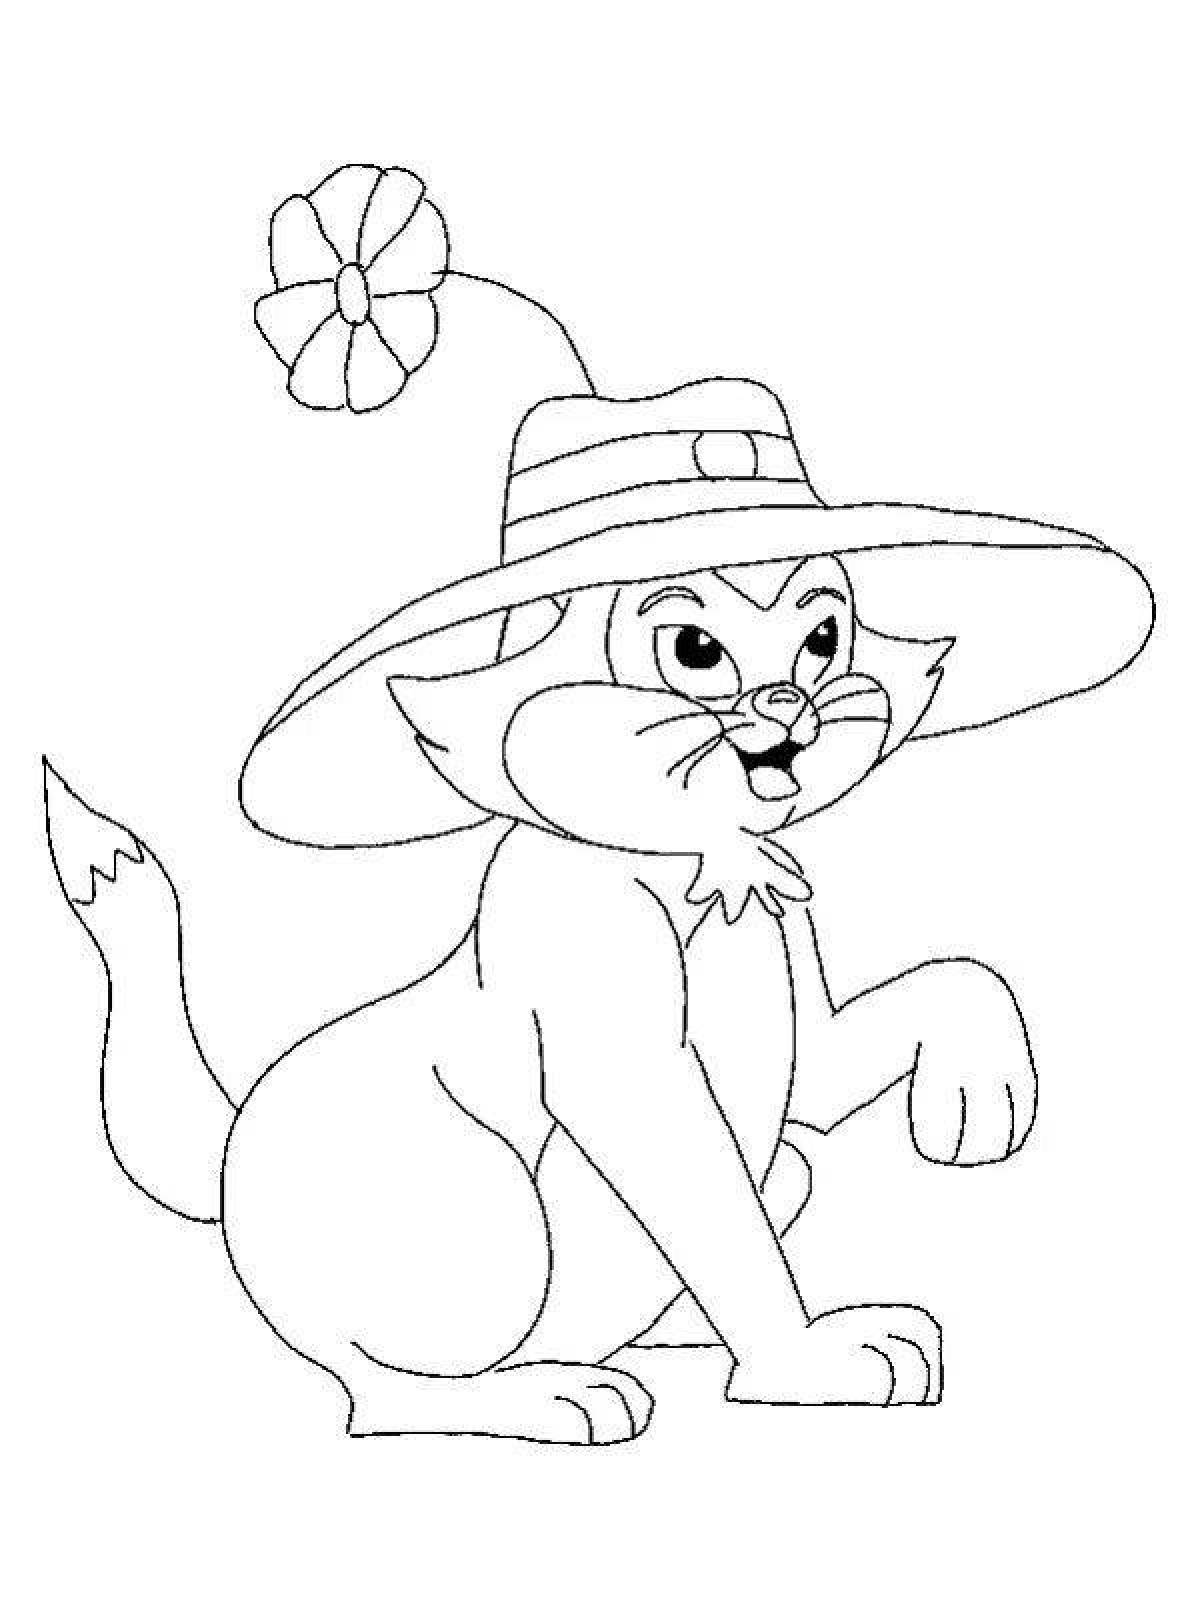 Fun lively hat coloring book for kids